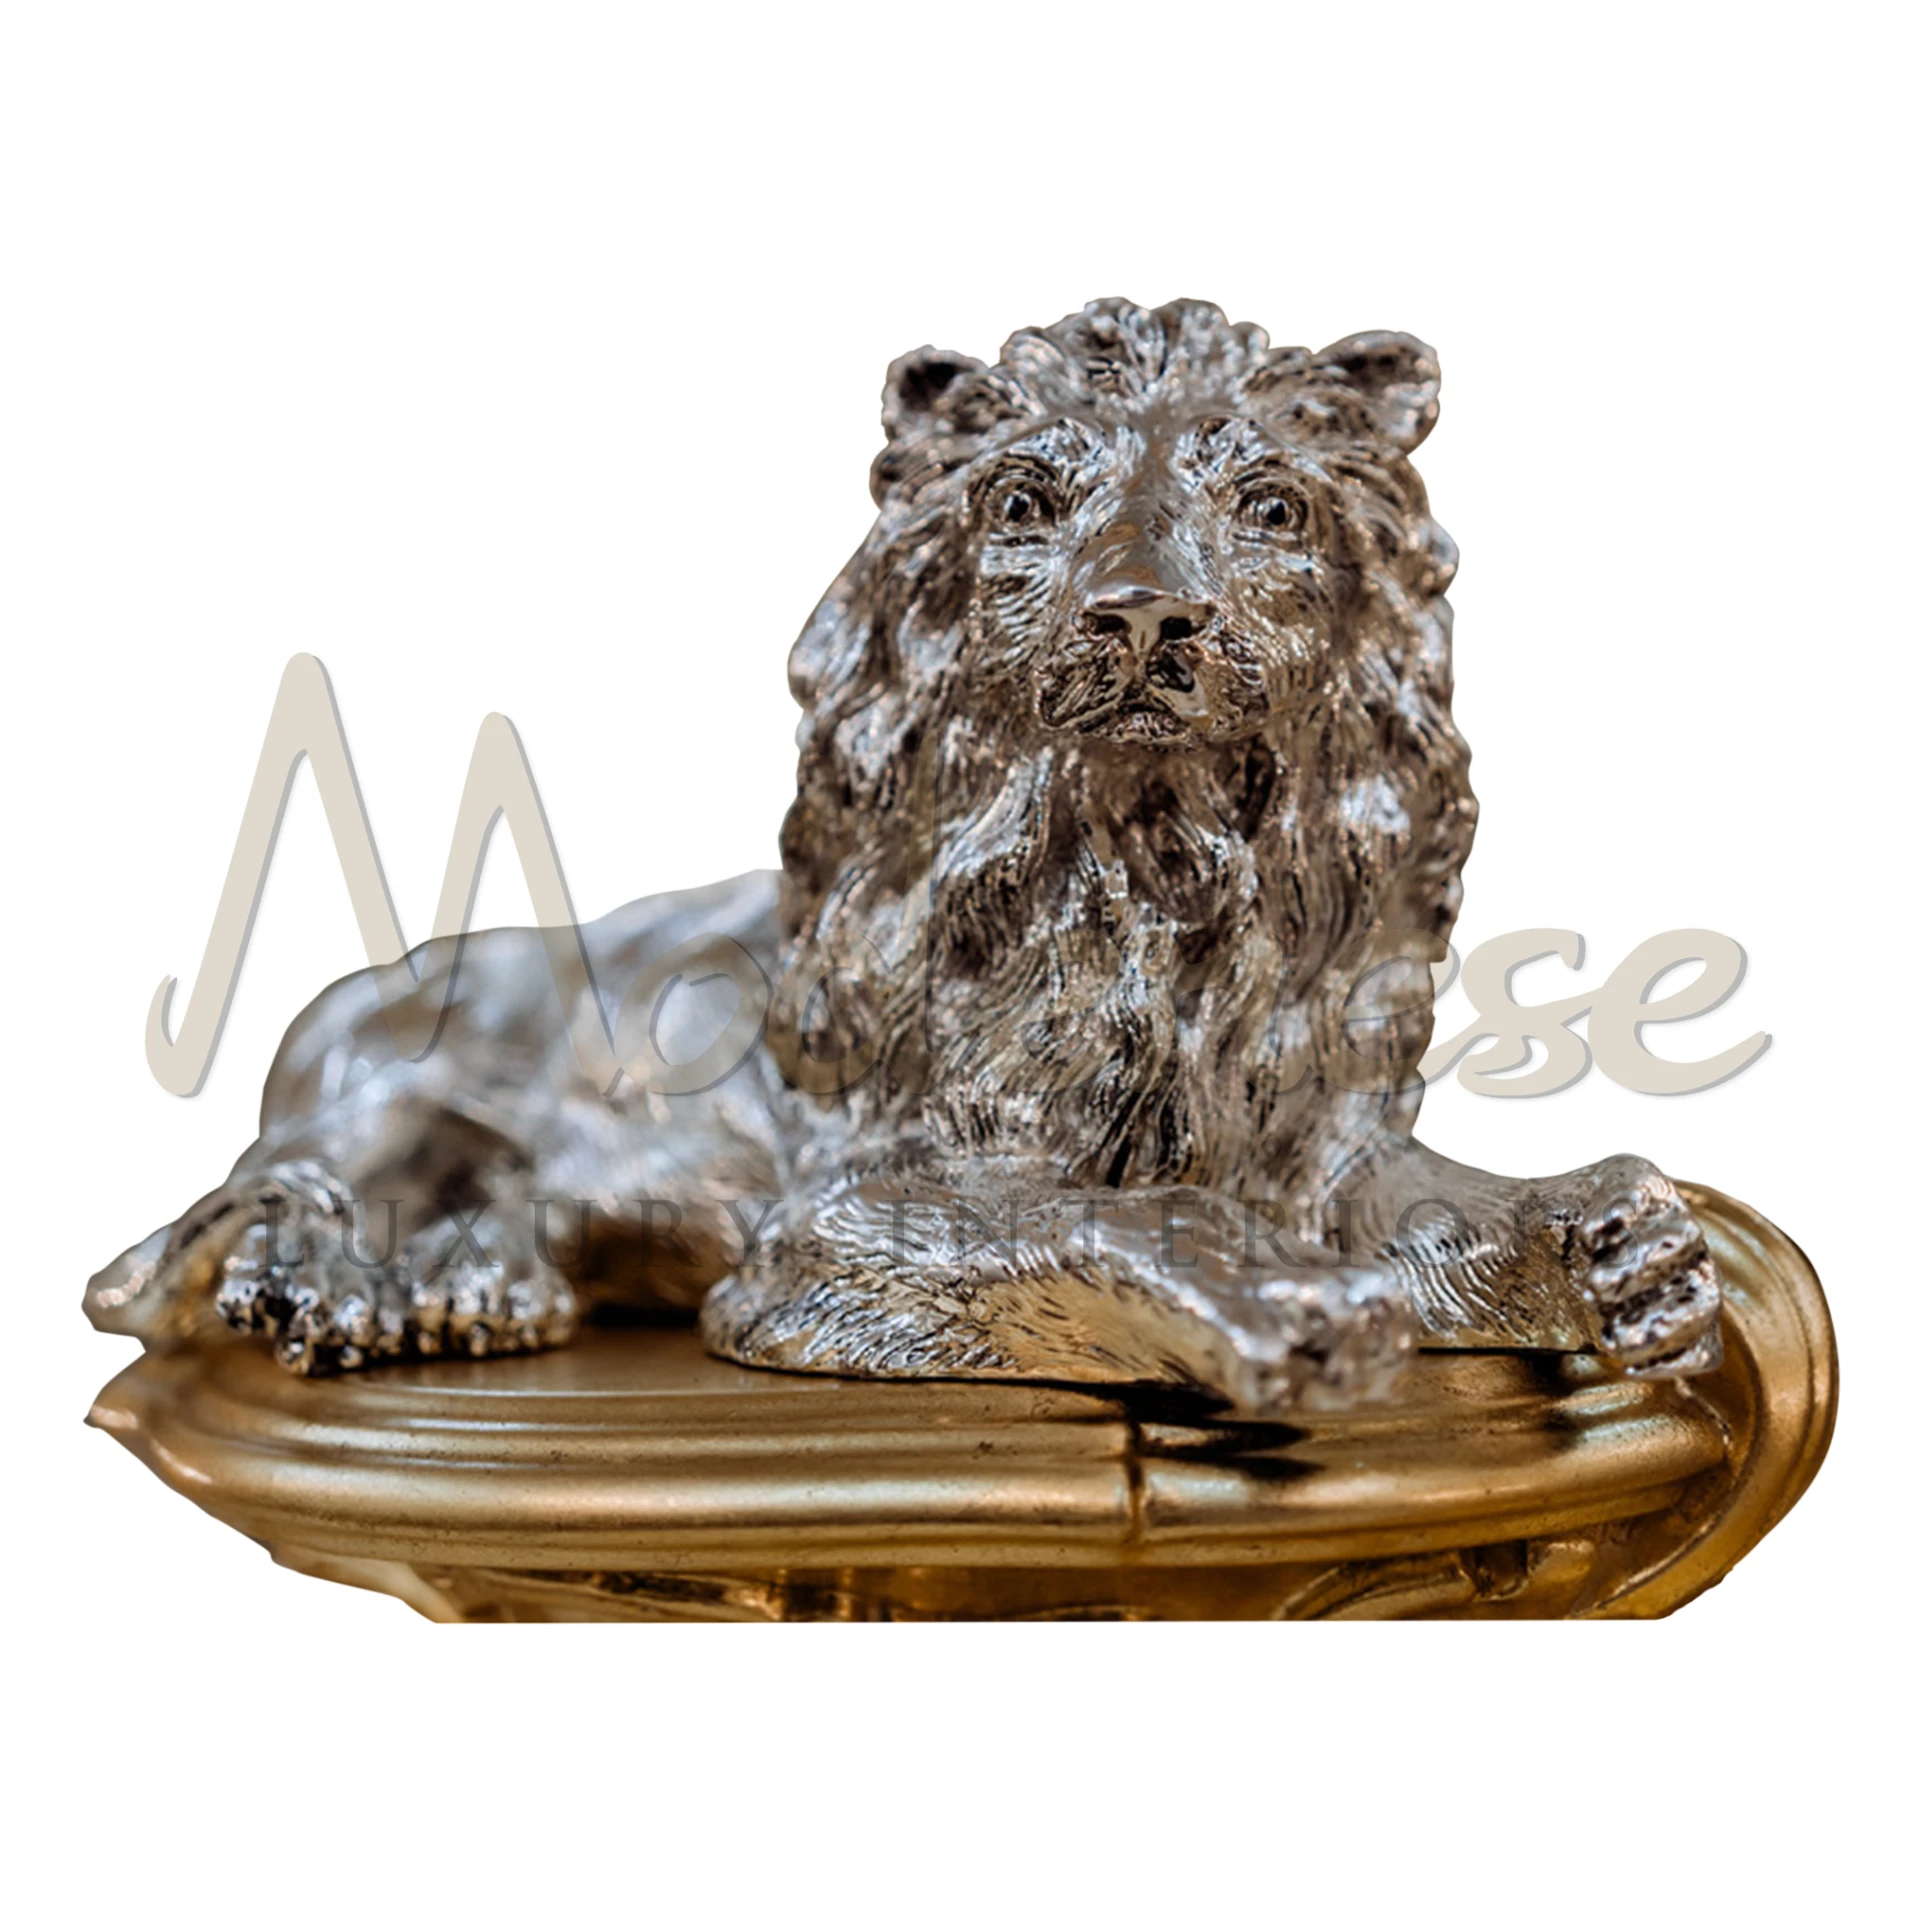 Majestic Imperial Lion statue, symbolizing strength and grandeur, meticulously crafted with intricate details, perfect for luxurious home decor.